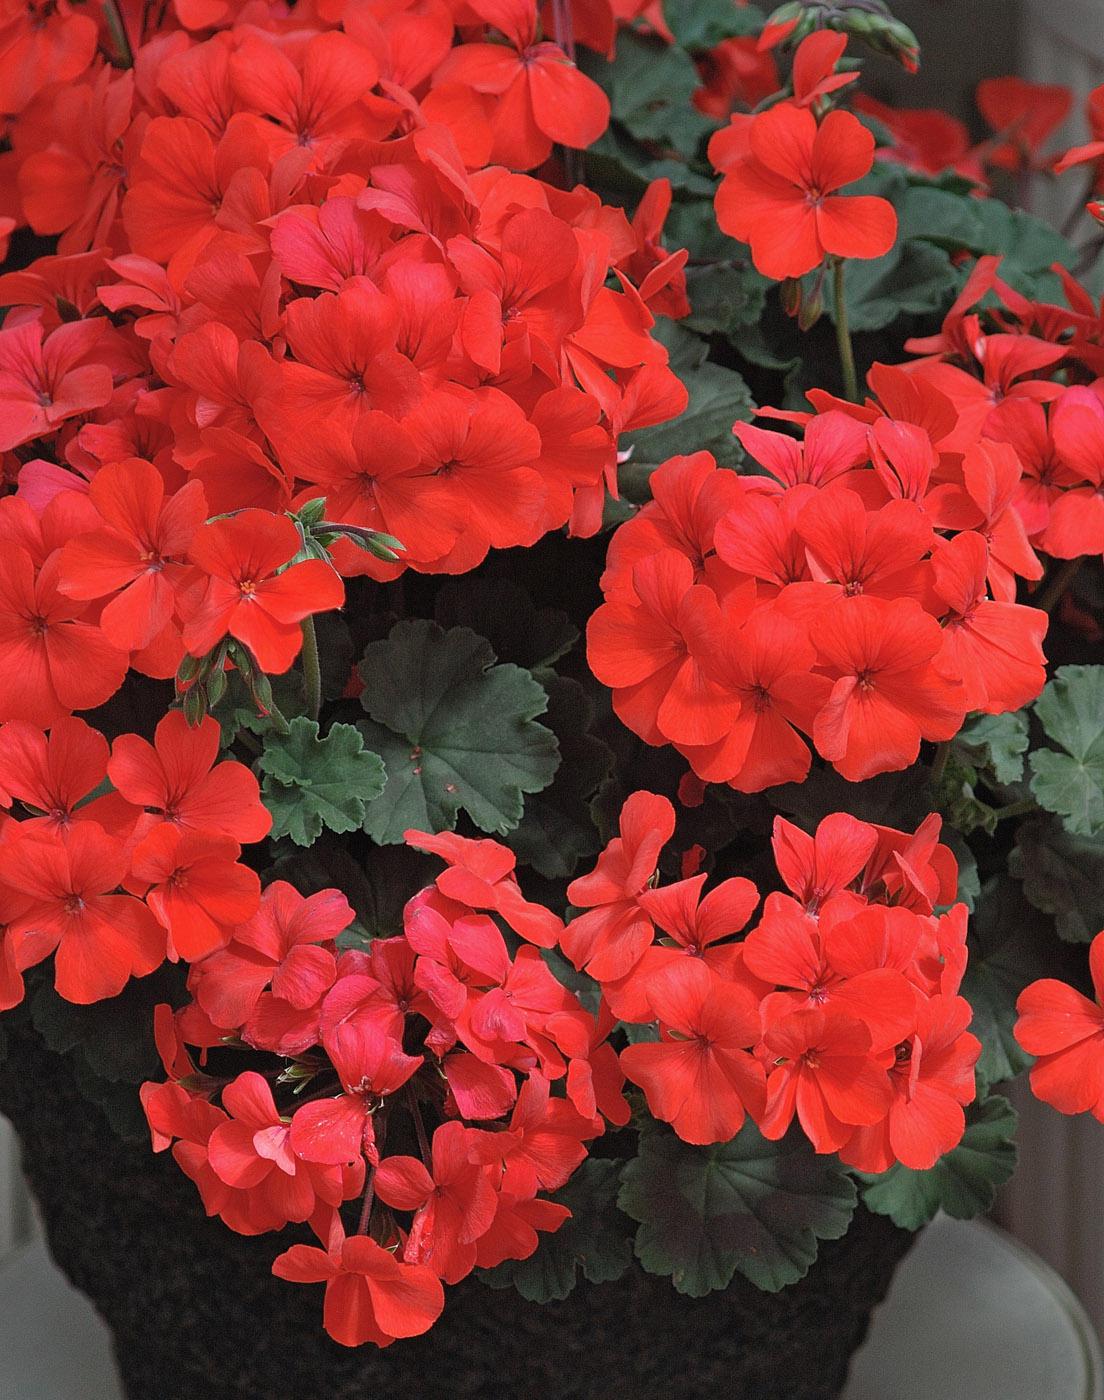 Caliente Orange is a hot new geranium that can withstand the heat of Mississippi's summers. (Photo by Norman Winter)